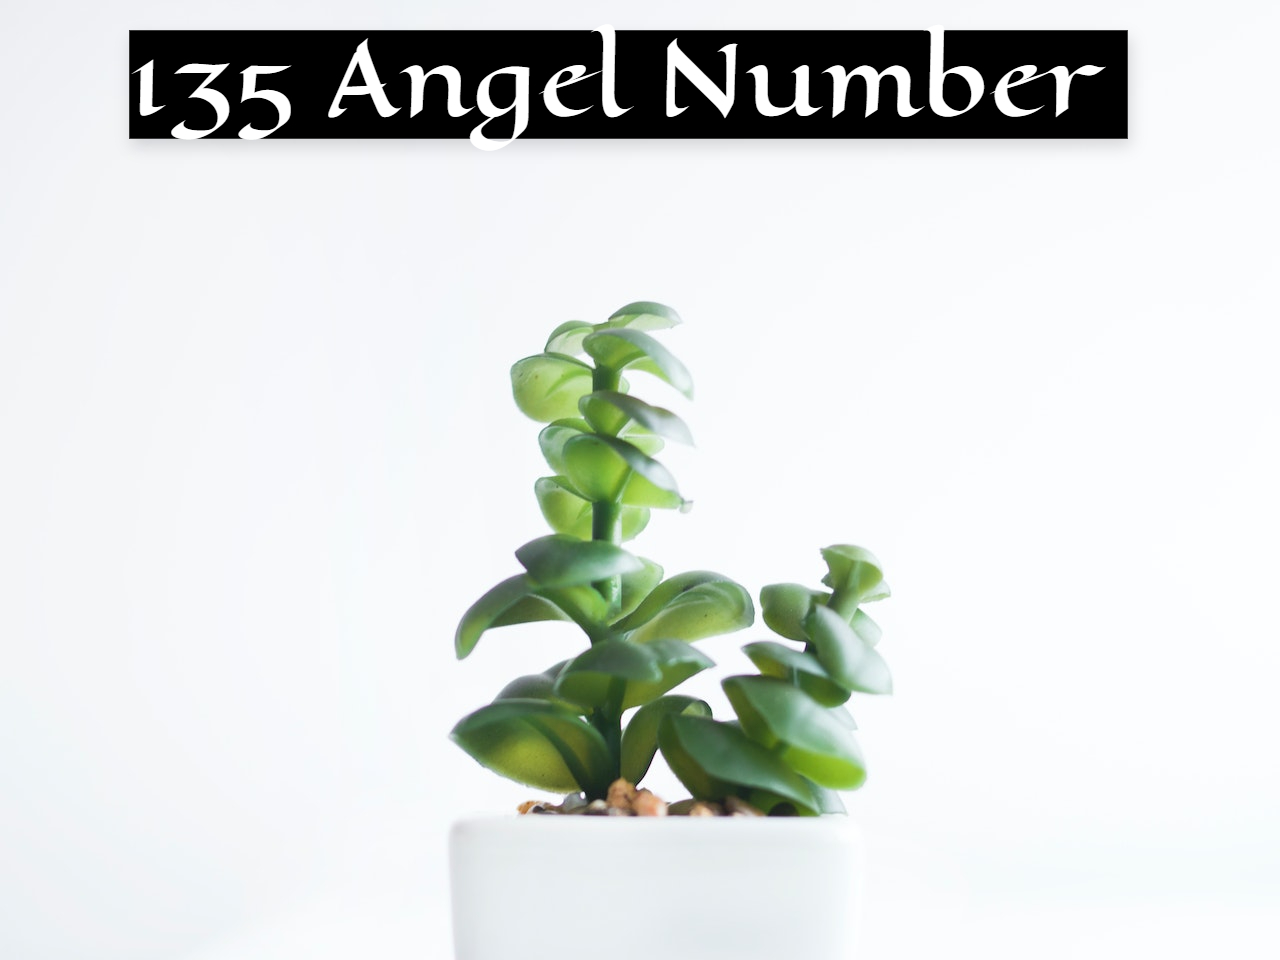 135 Angel Number - A Luckiest Number